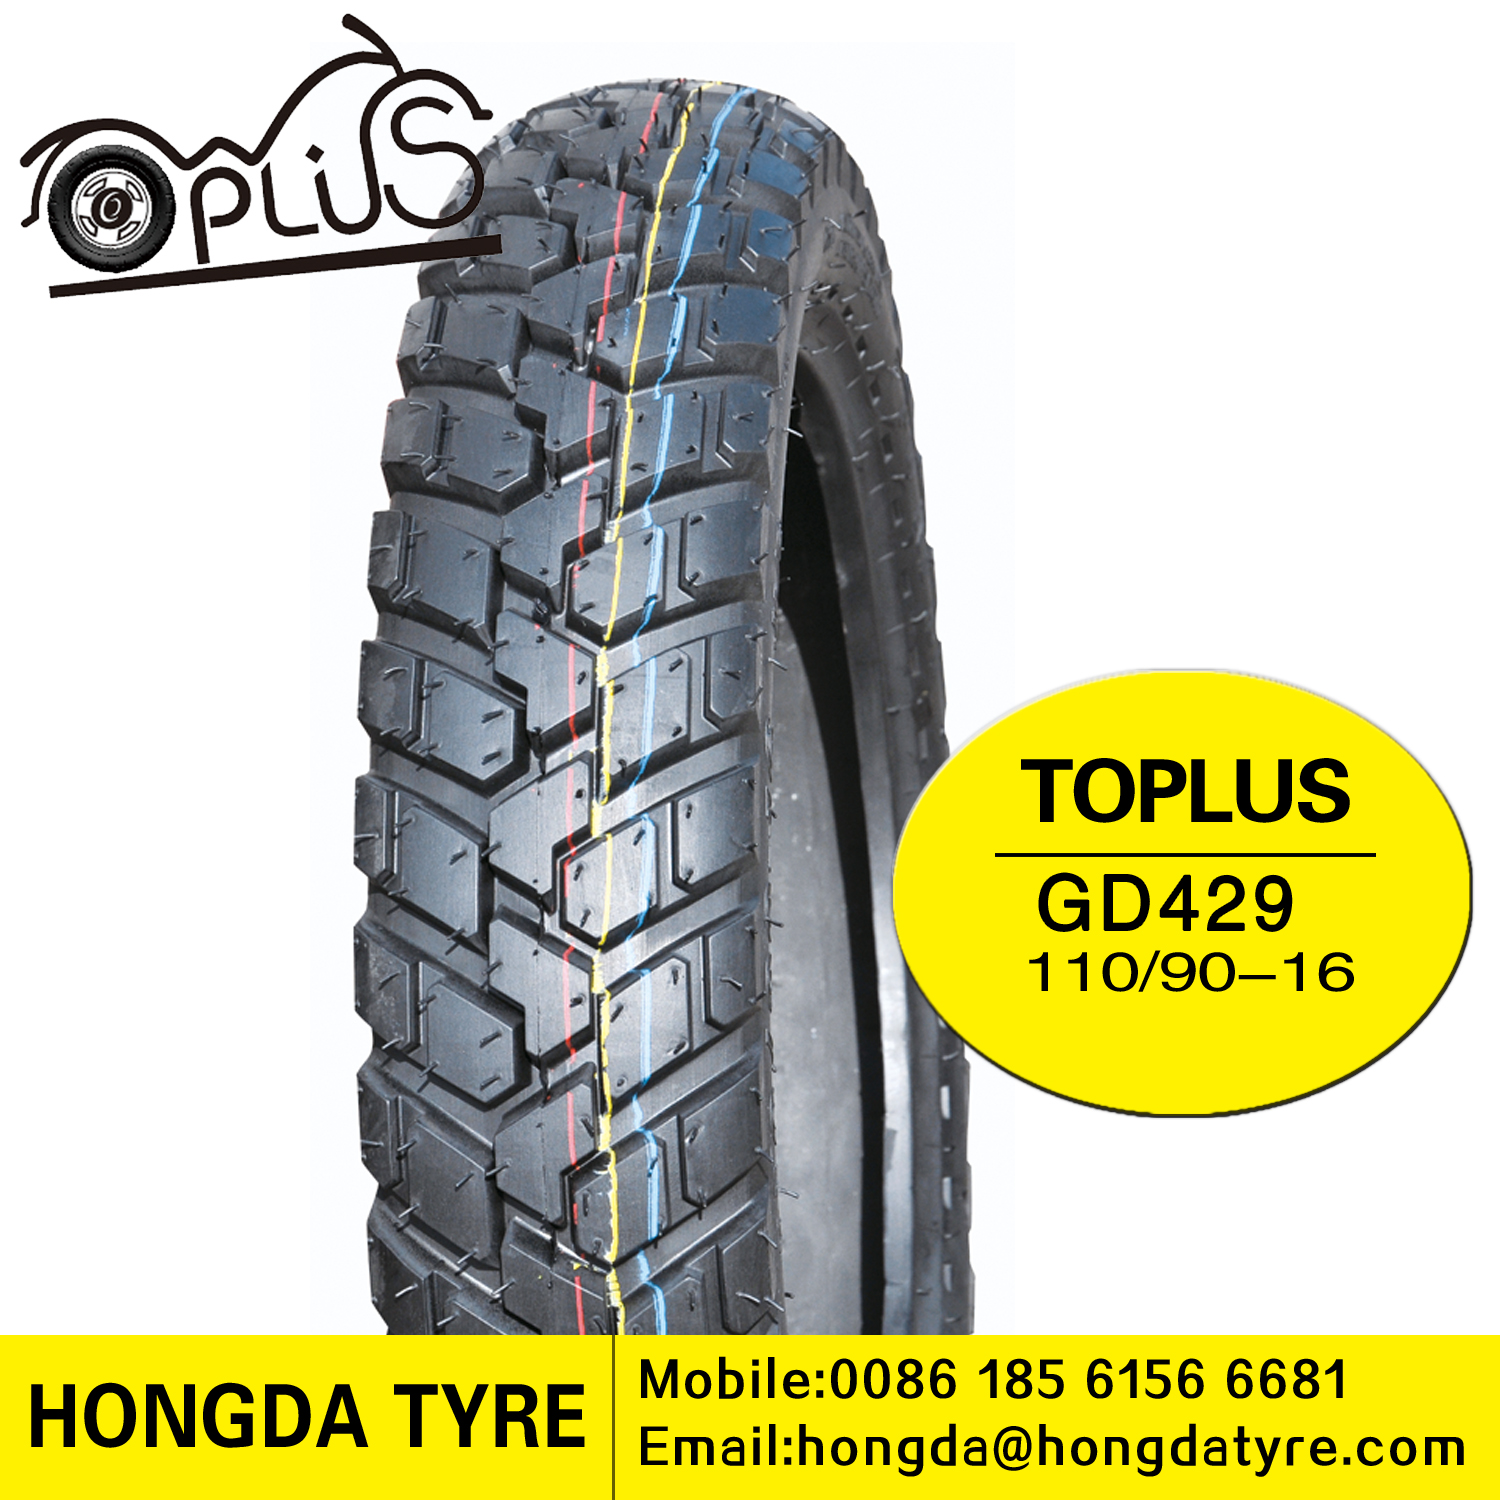 Motorcycle tyre GD429